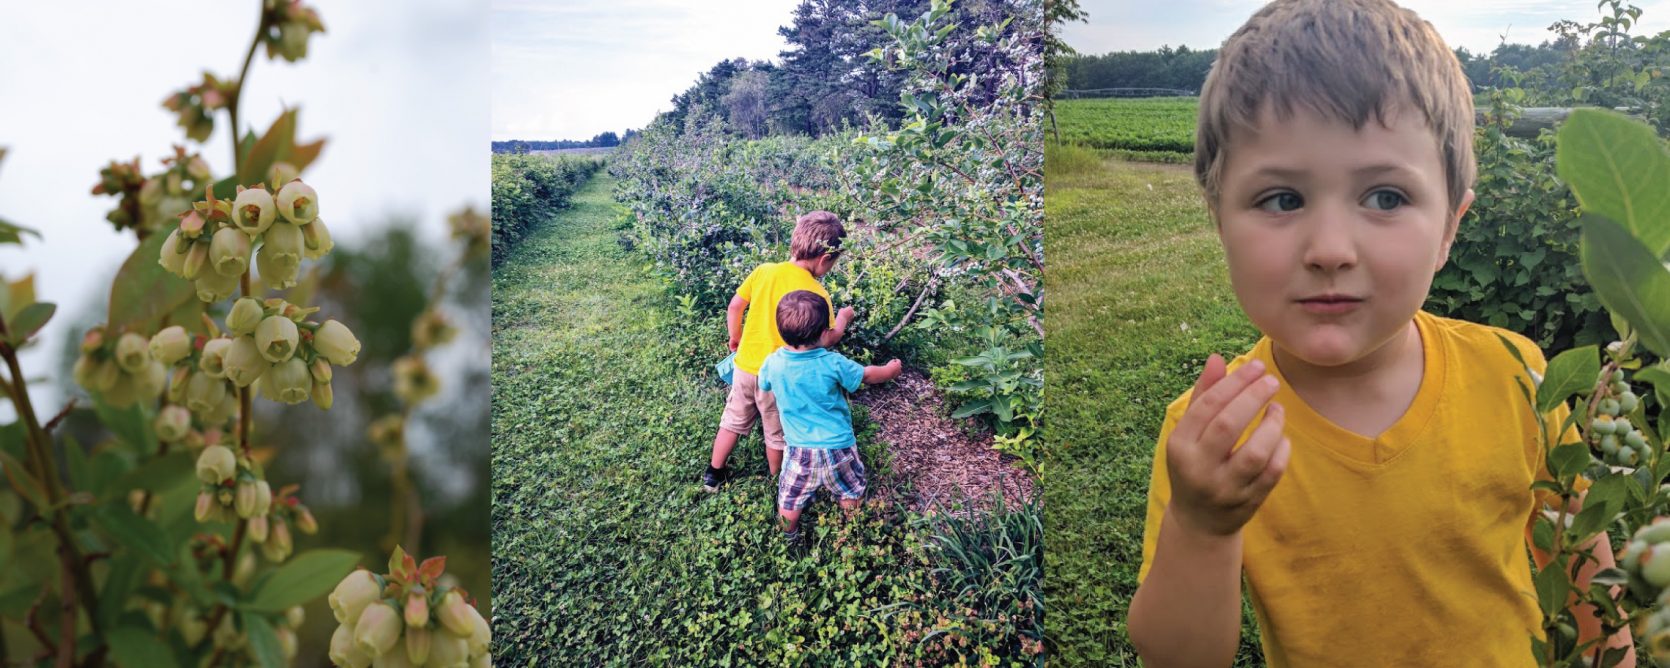 pick your own blueberries at the pineland farms produce division in new gloucester, maine